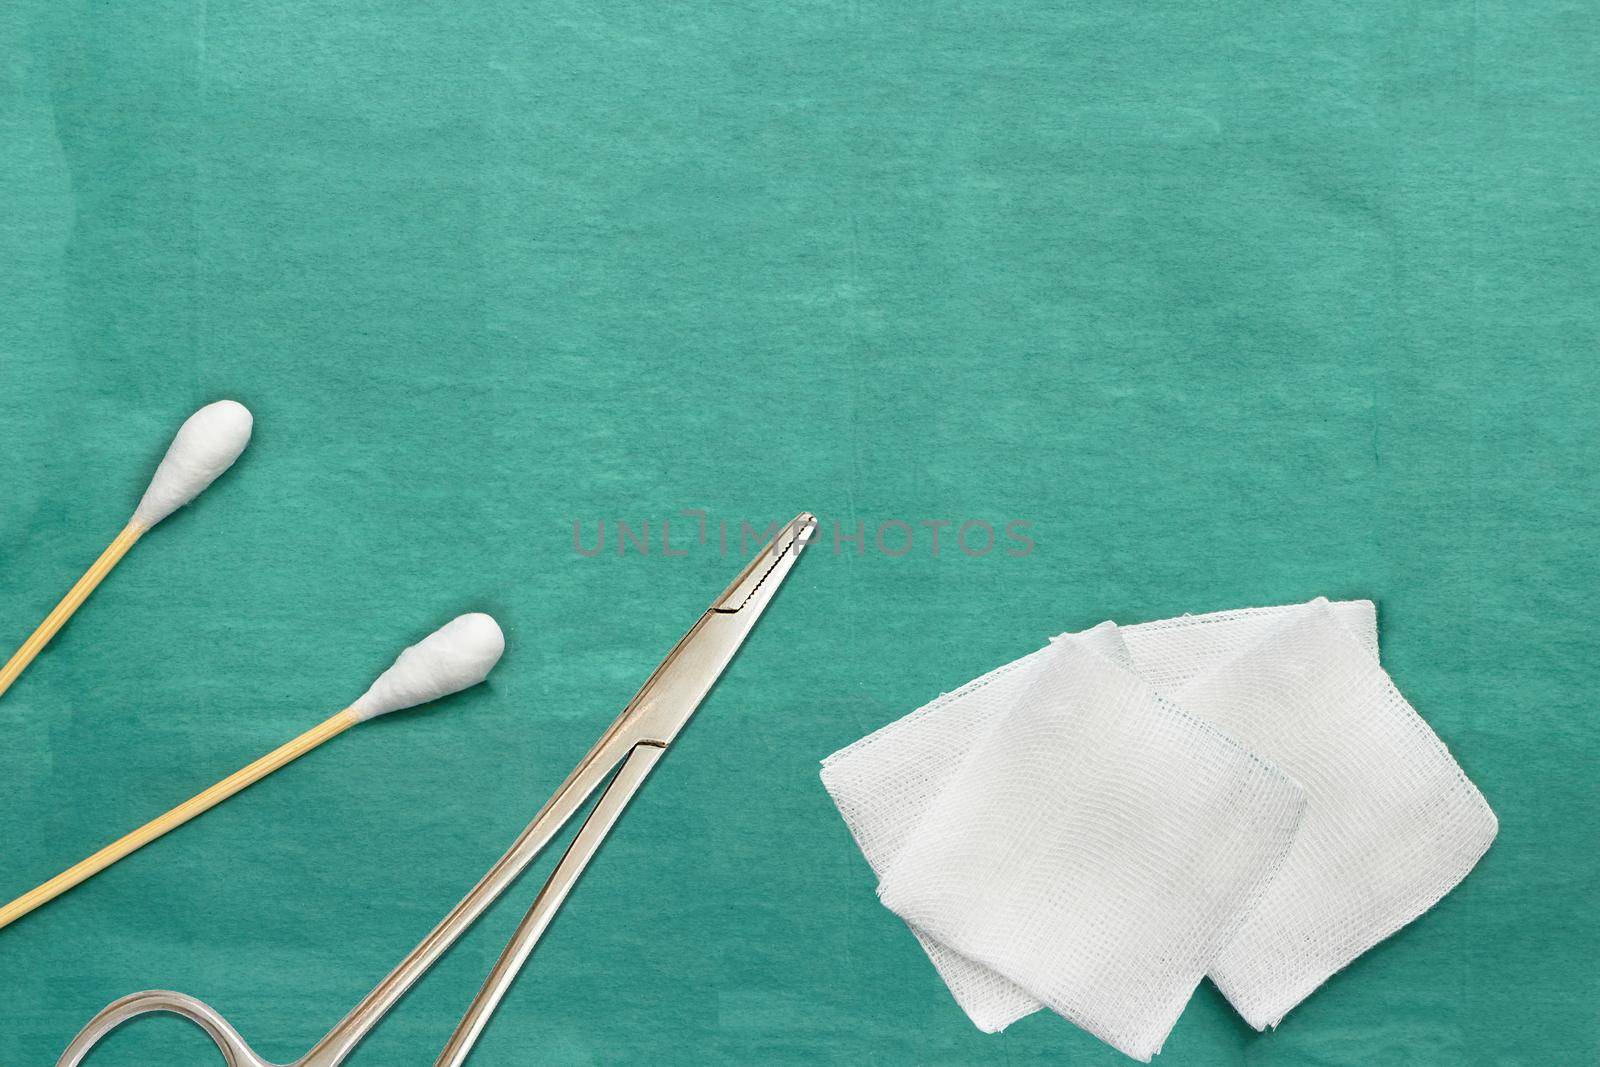 gauze and roll bandage for medical wound dressing care